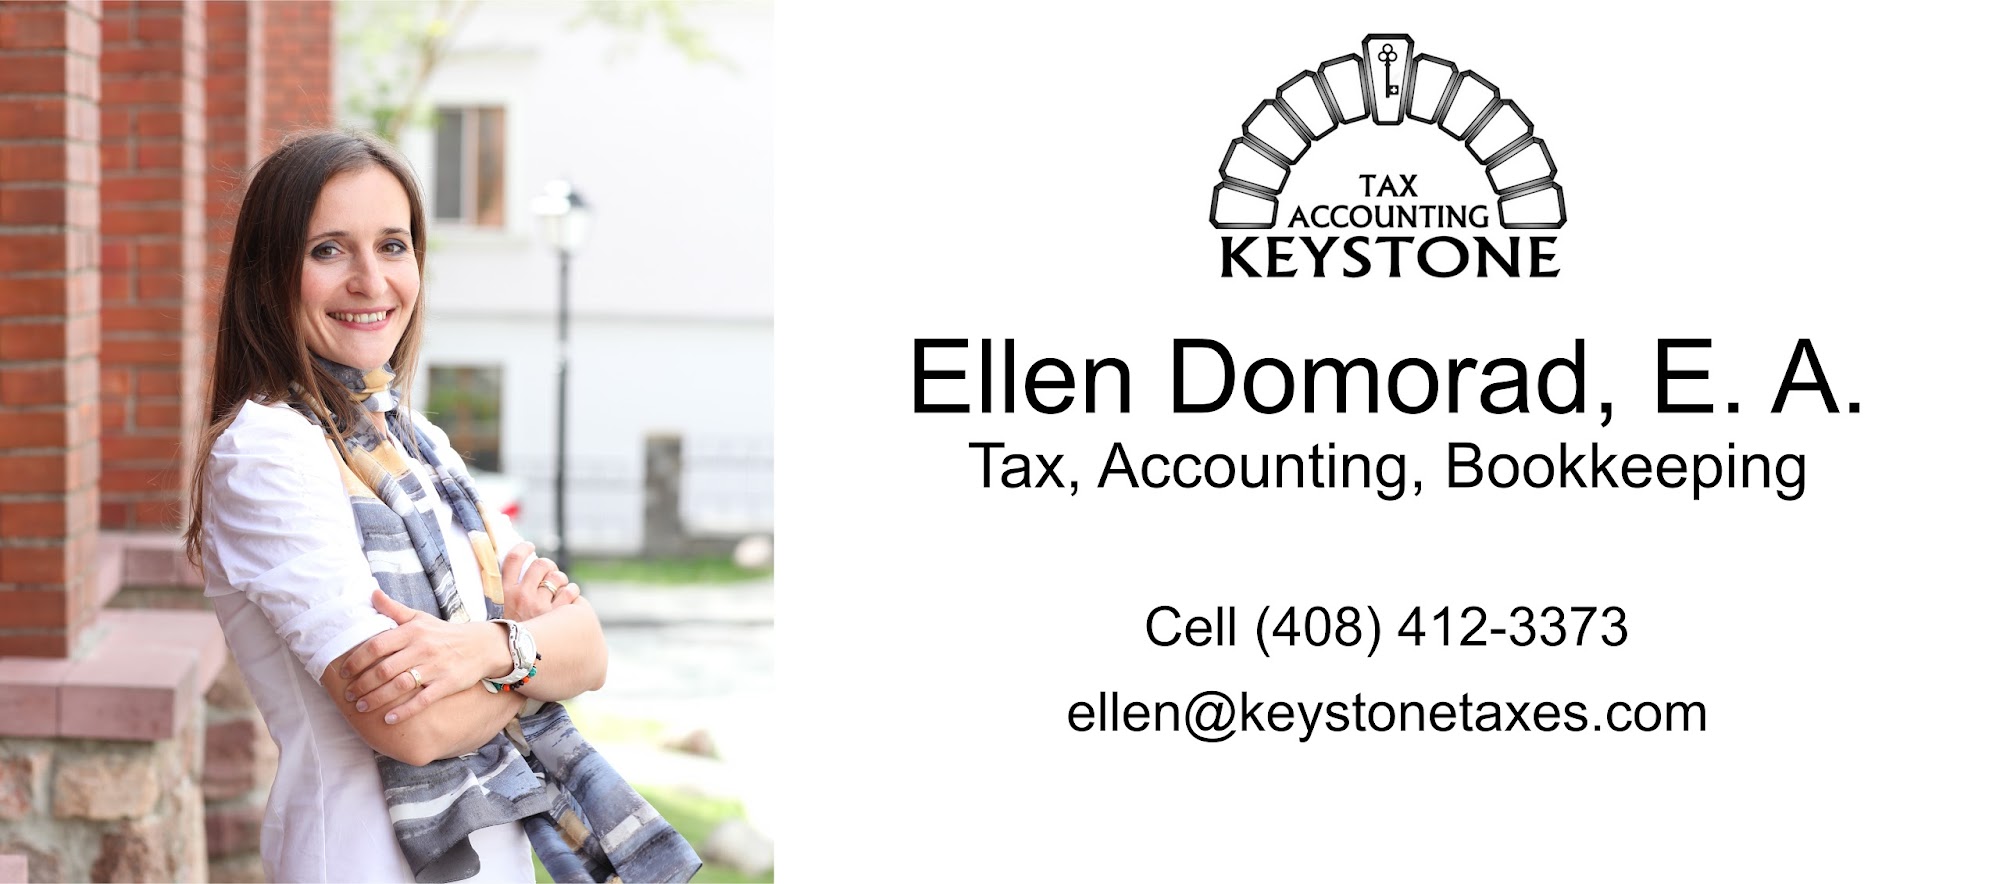 Keystone Tax LLC. Tax Preparation, Resolution, Bookkeeping Services in Sunnyvale and around